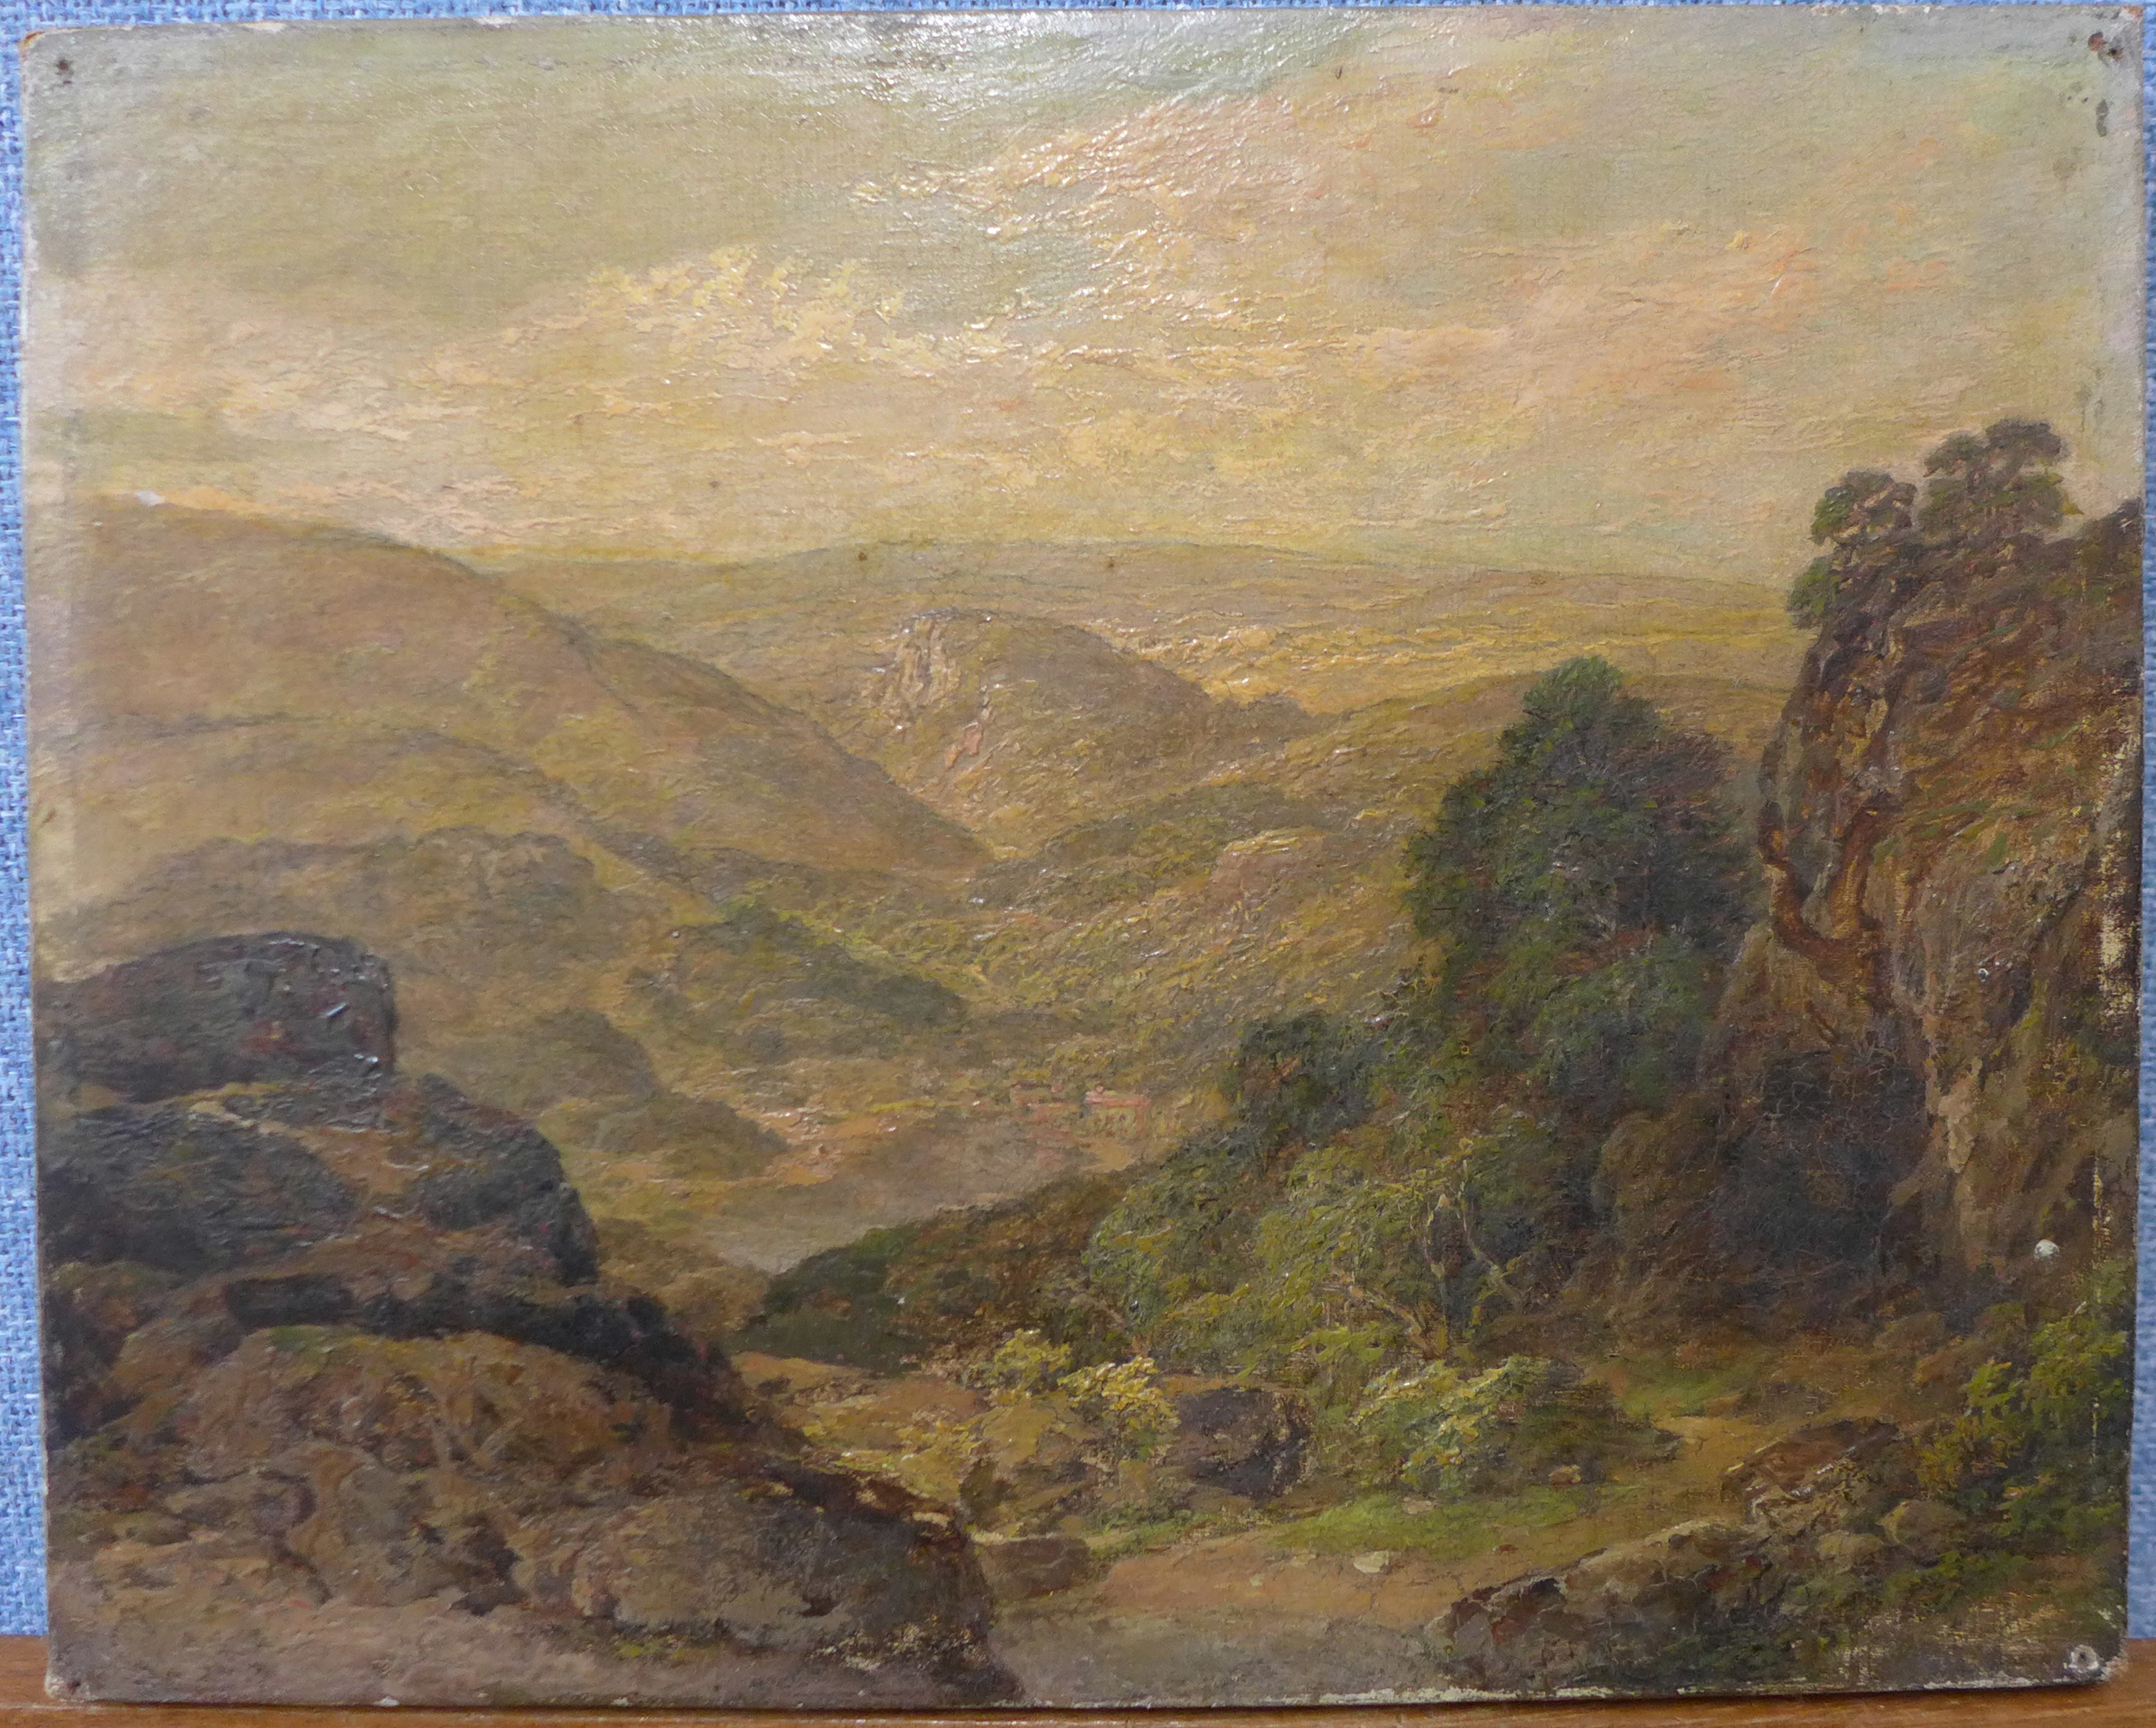 Edward Price (British 1800-1885), Matlock and Dovedale, oil on canvas, 20 x 25cms, - Image 2 of 3